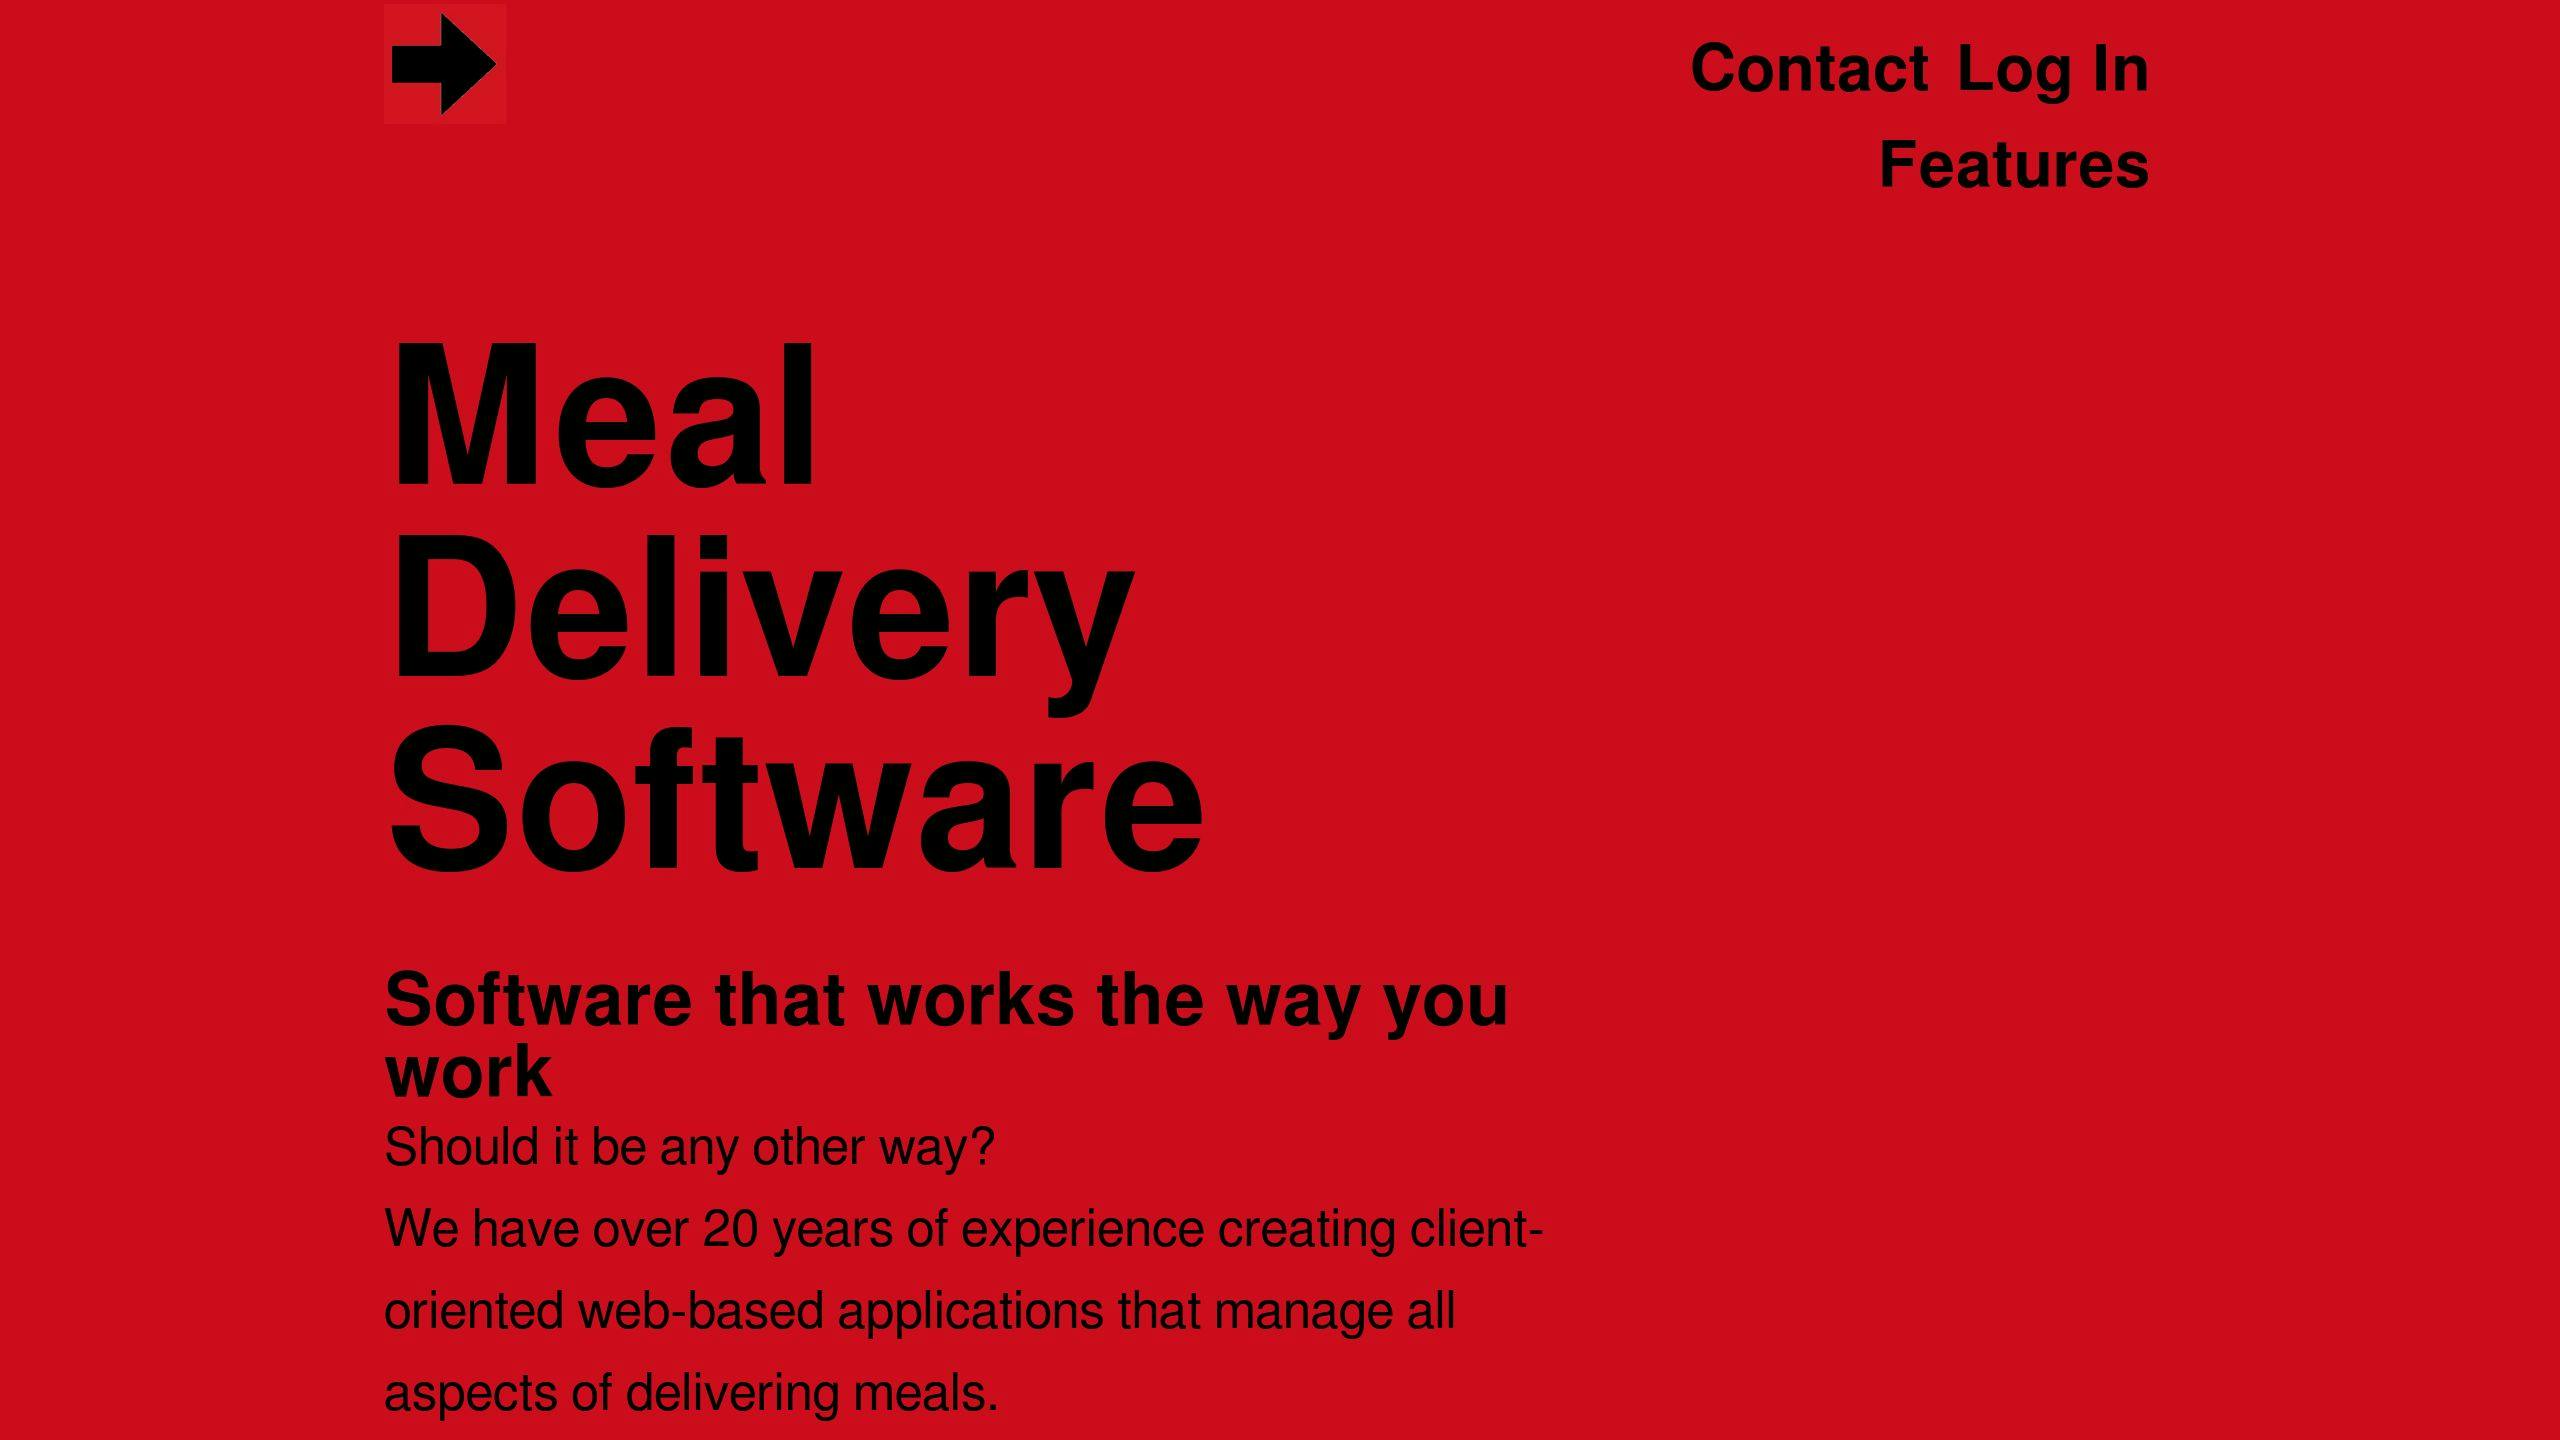 Meal Delivery Software